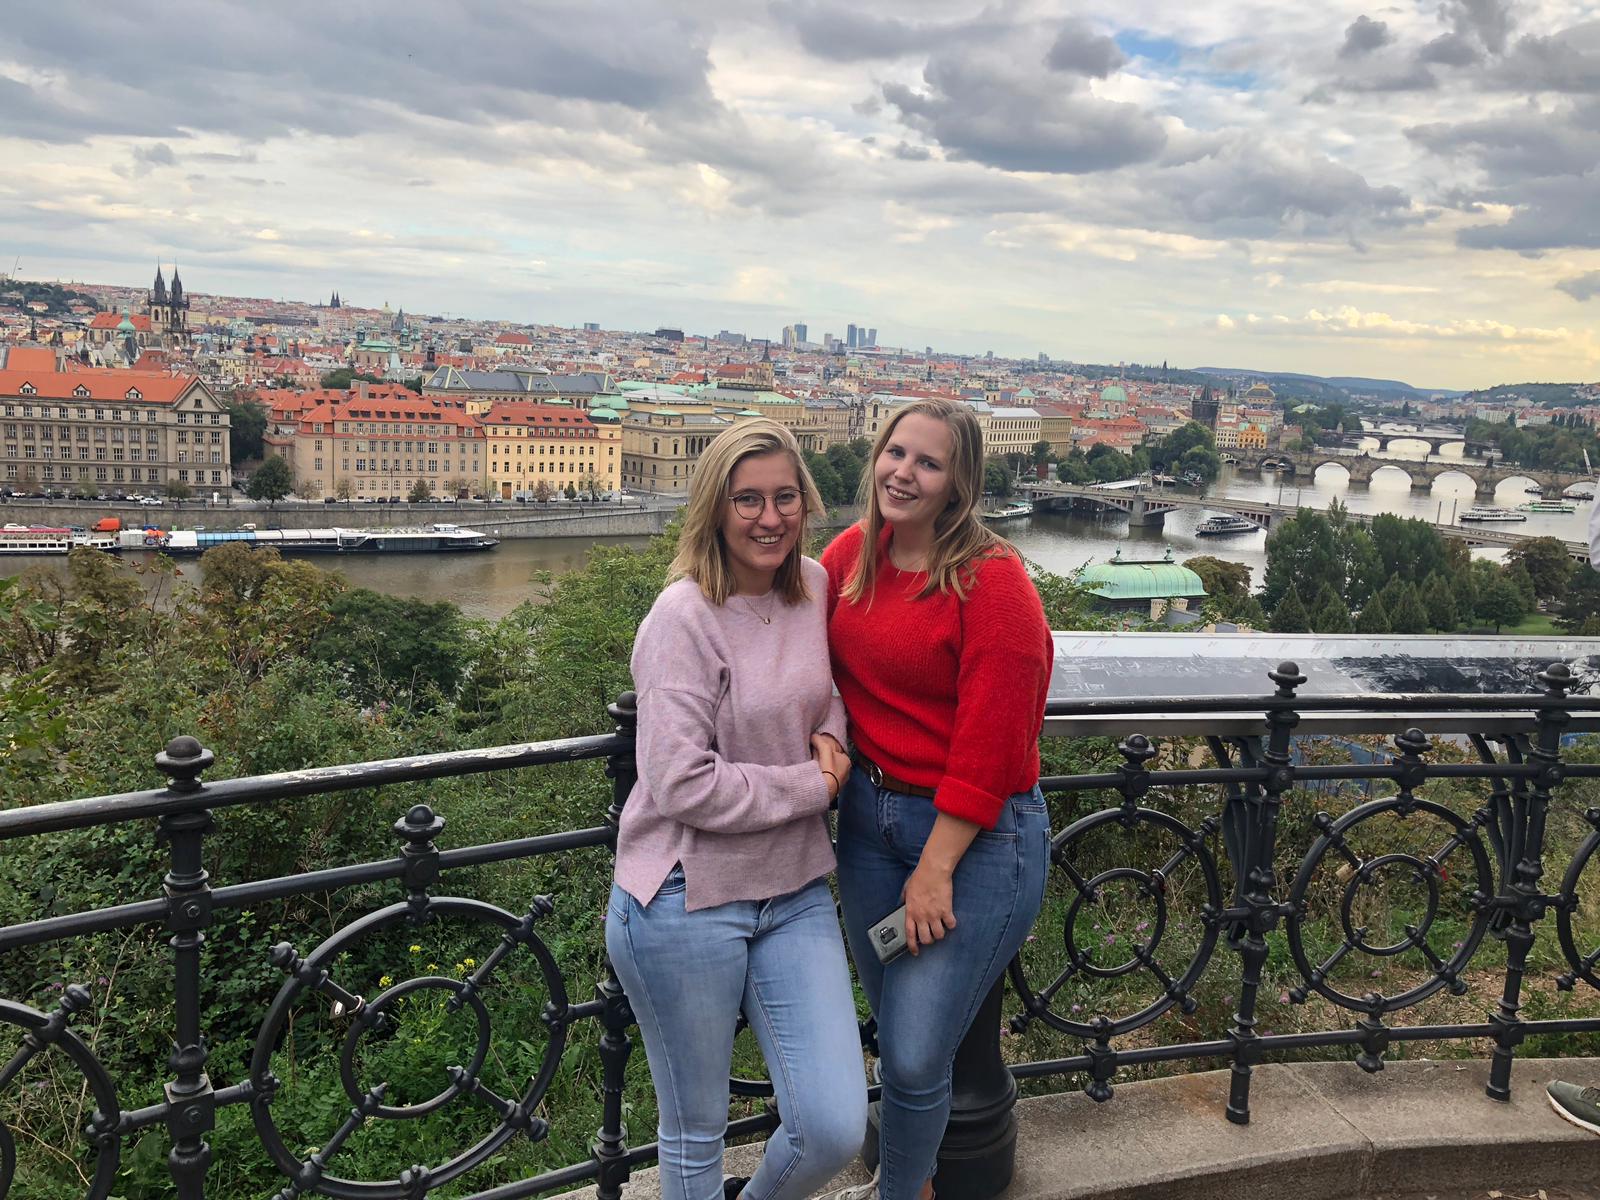 Big scooter tour of Prague, for two (audio guide)